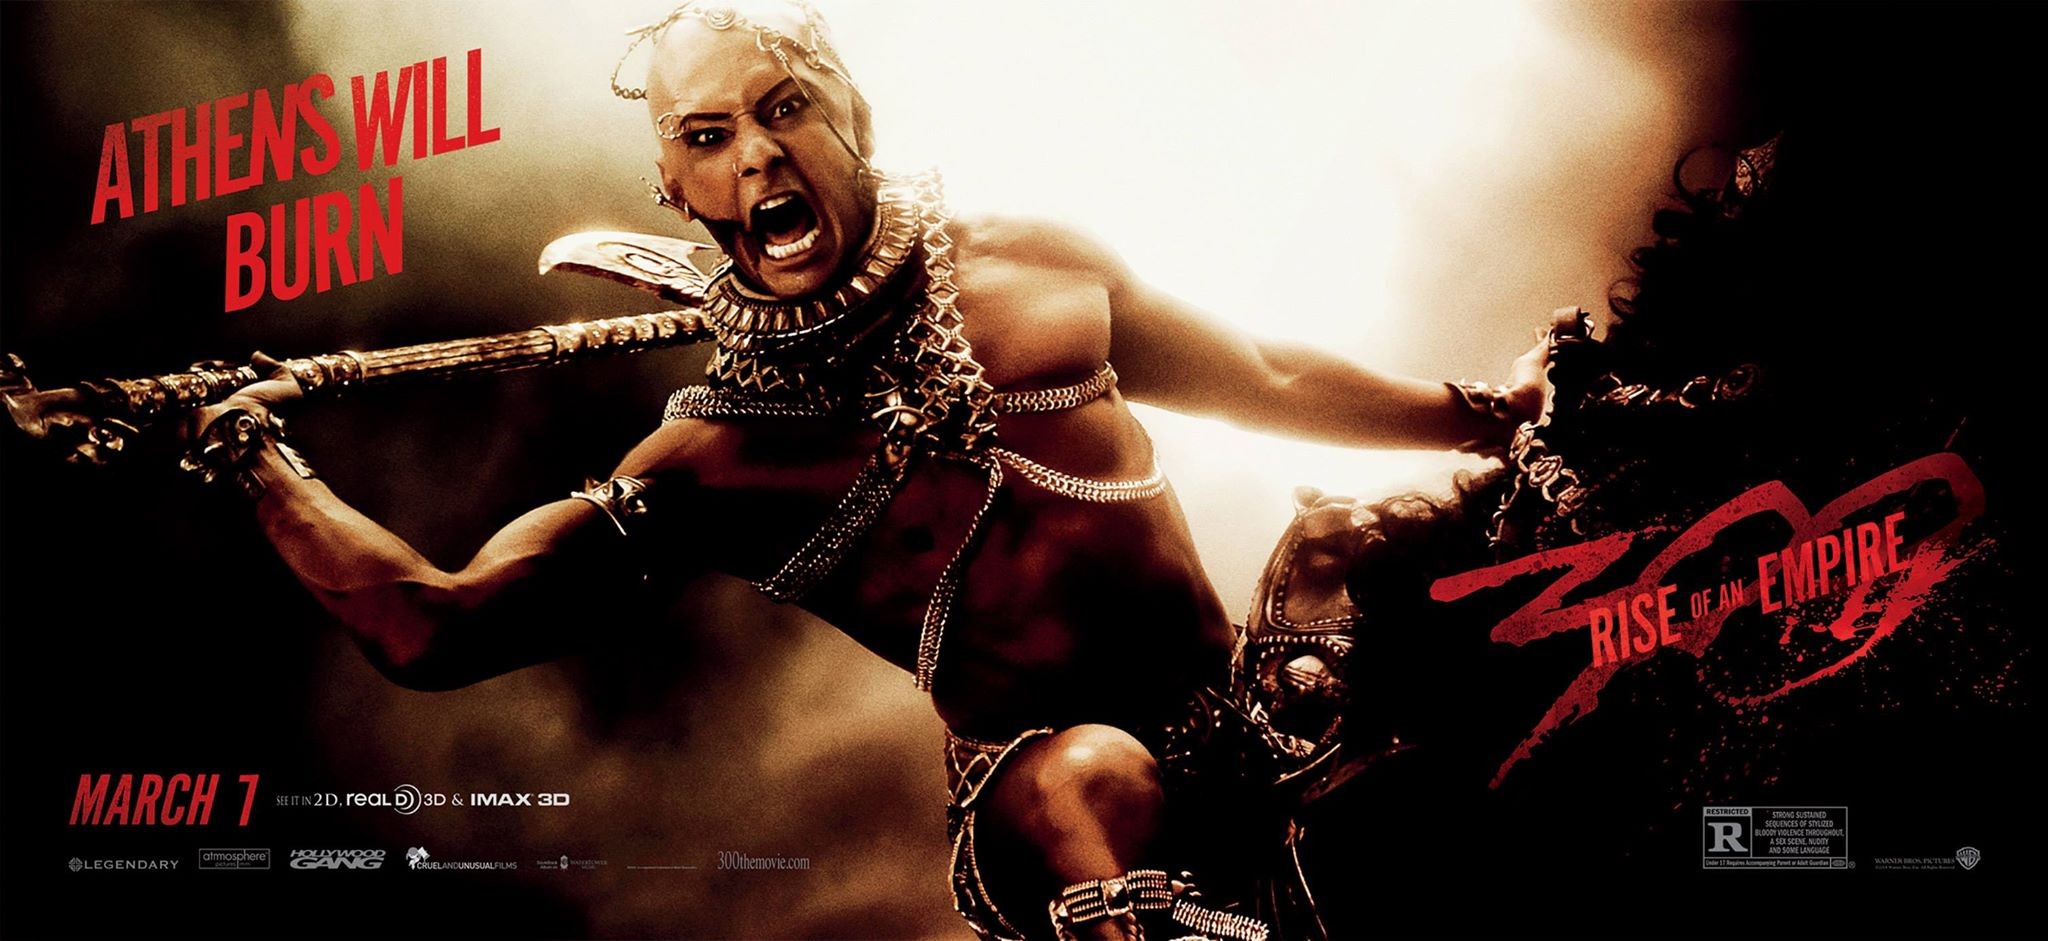 Mega Sized Movie Poster Image for 300: Rise of an Empire (#19 of 20)